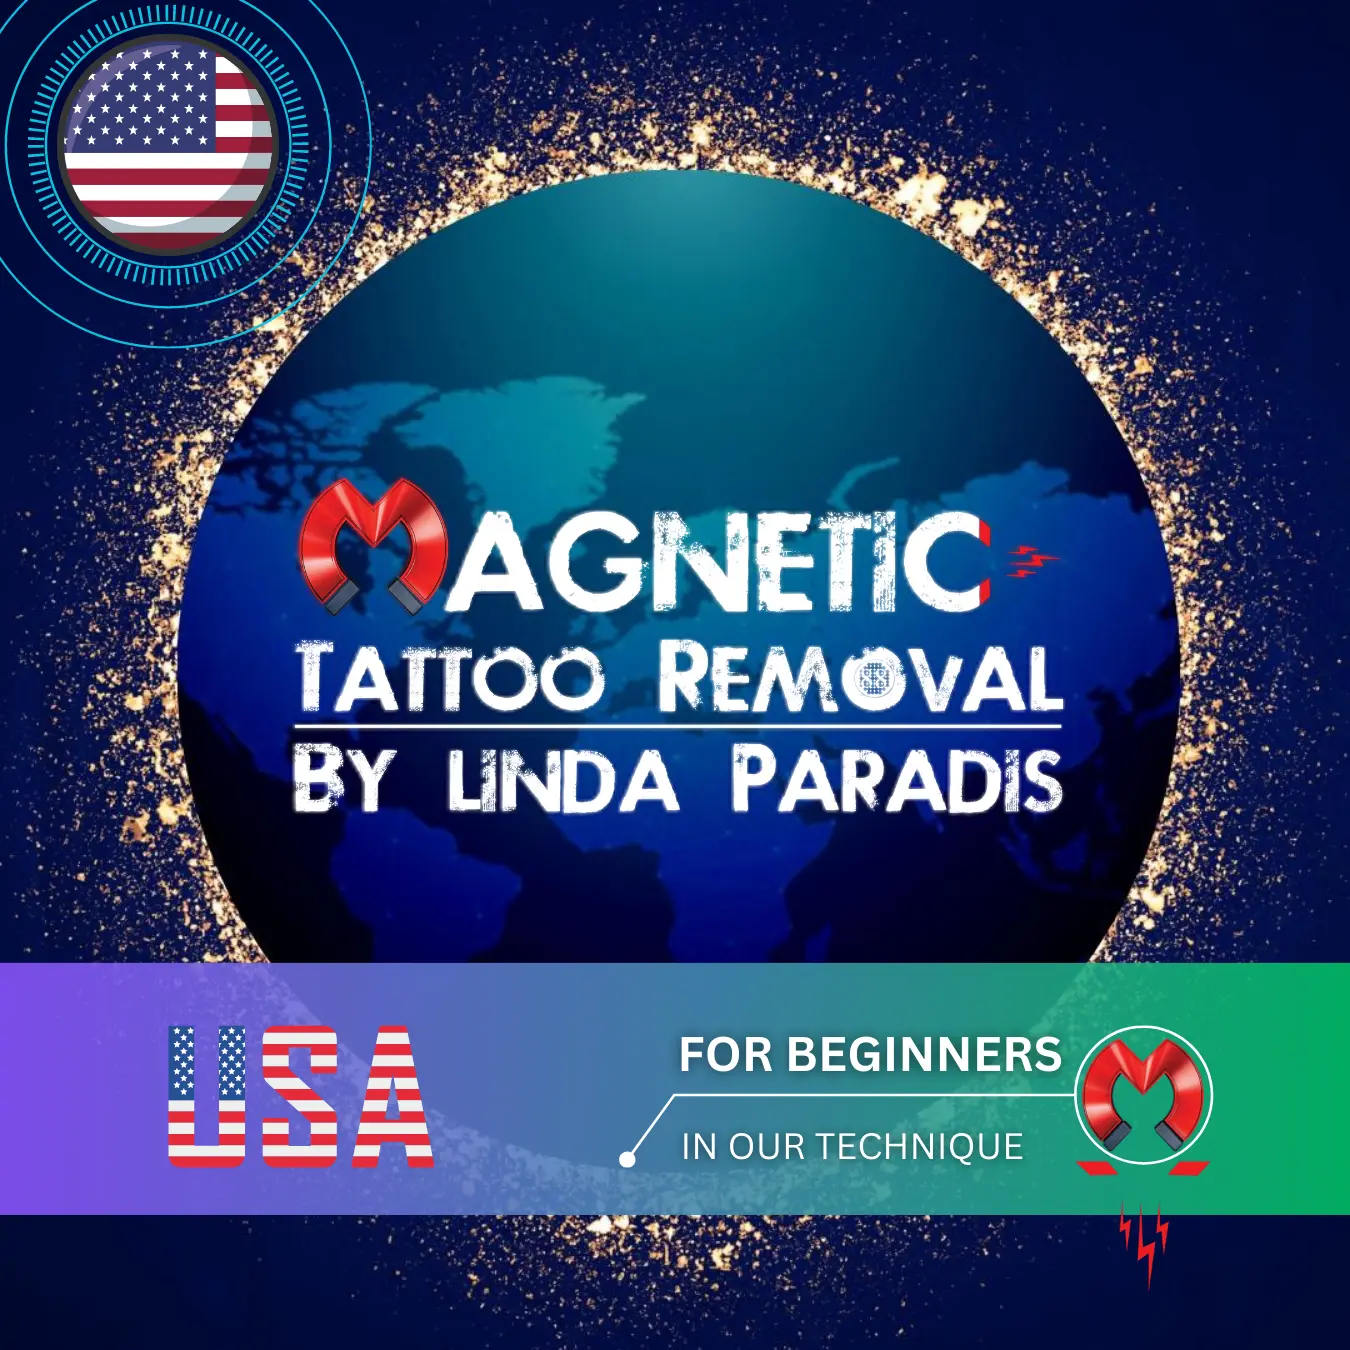 Magnetic Tattoo Removal Master Class